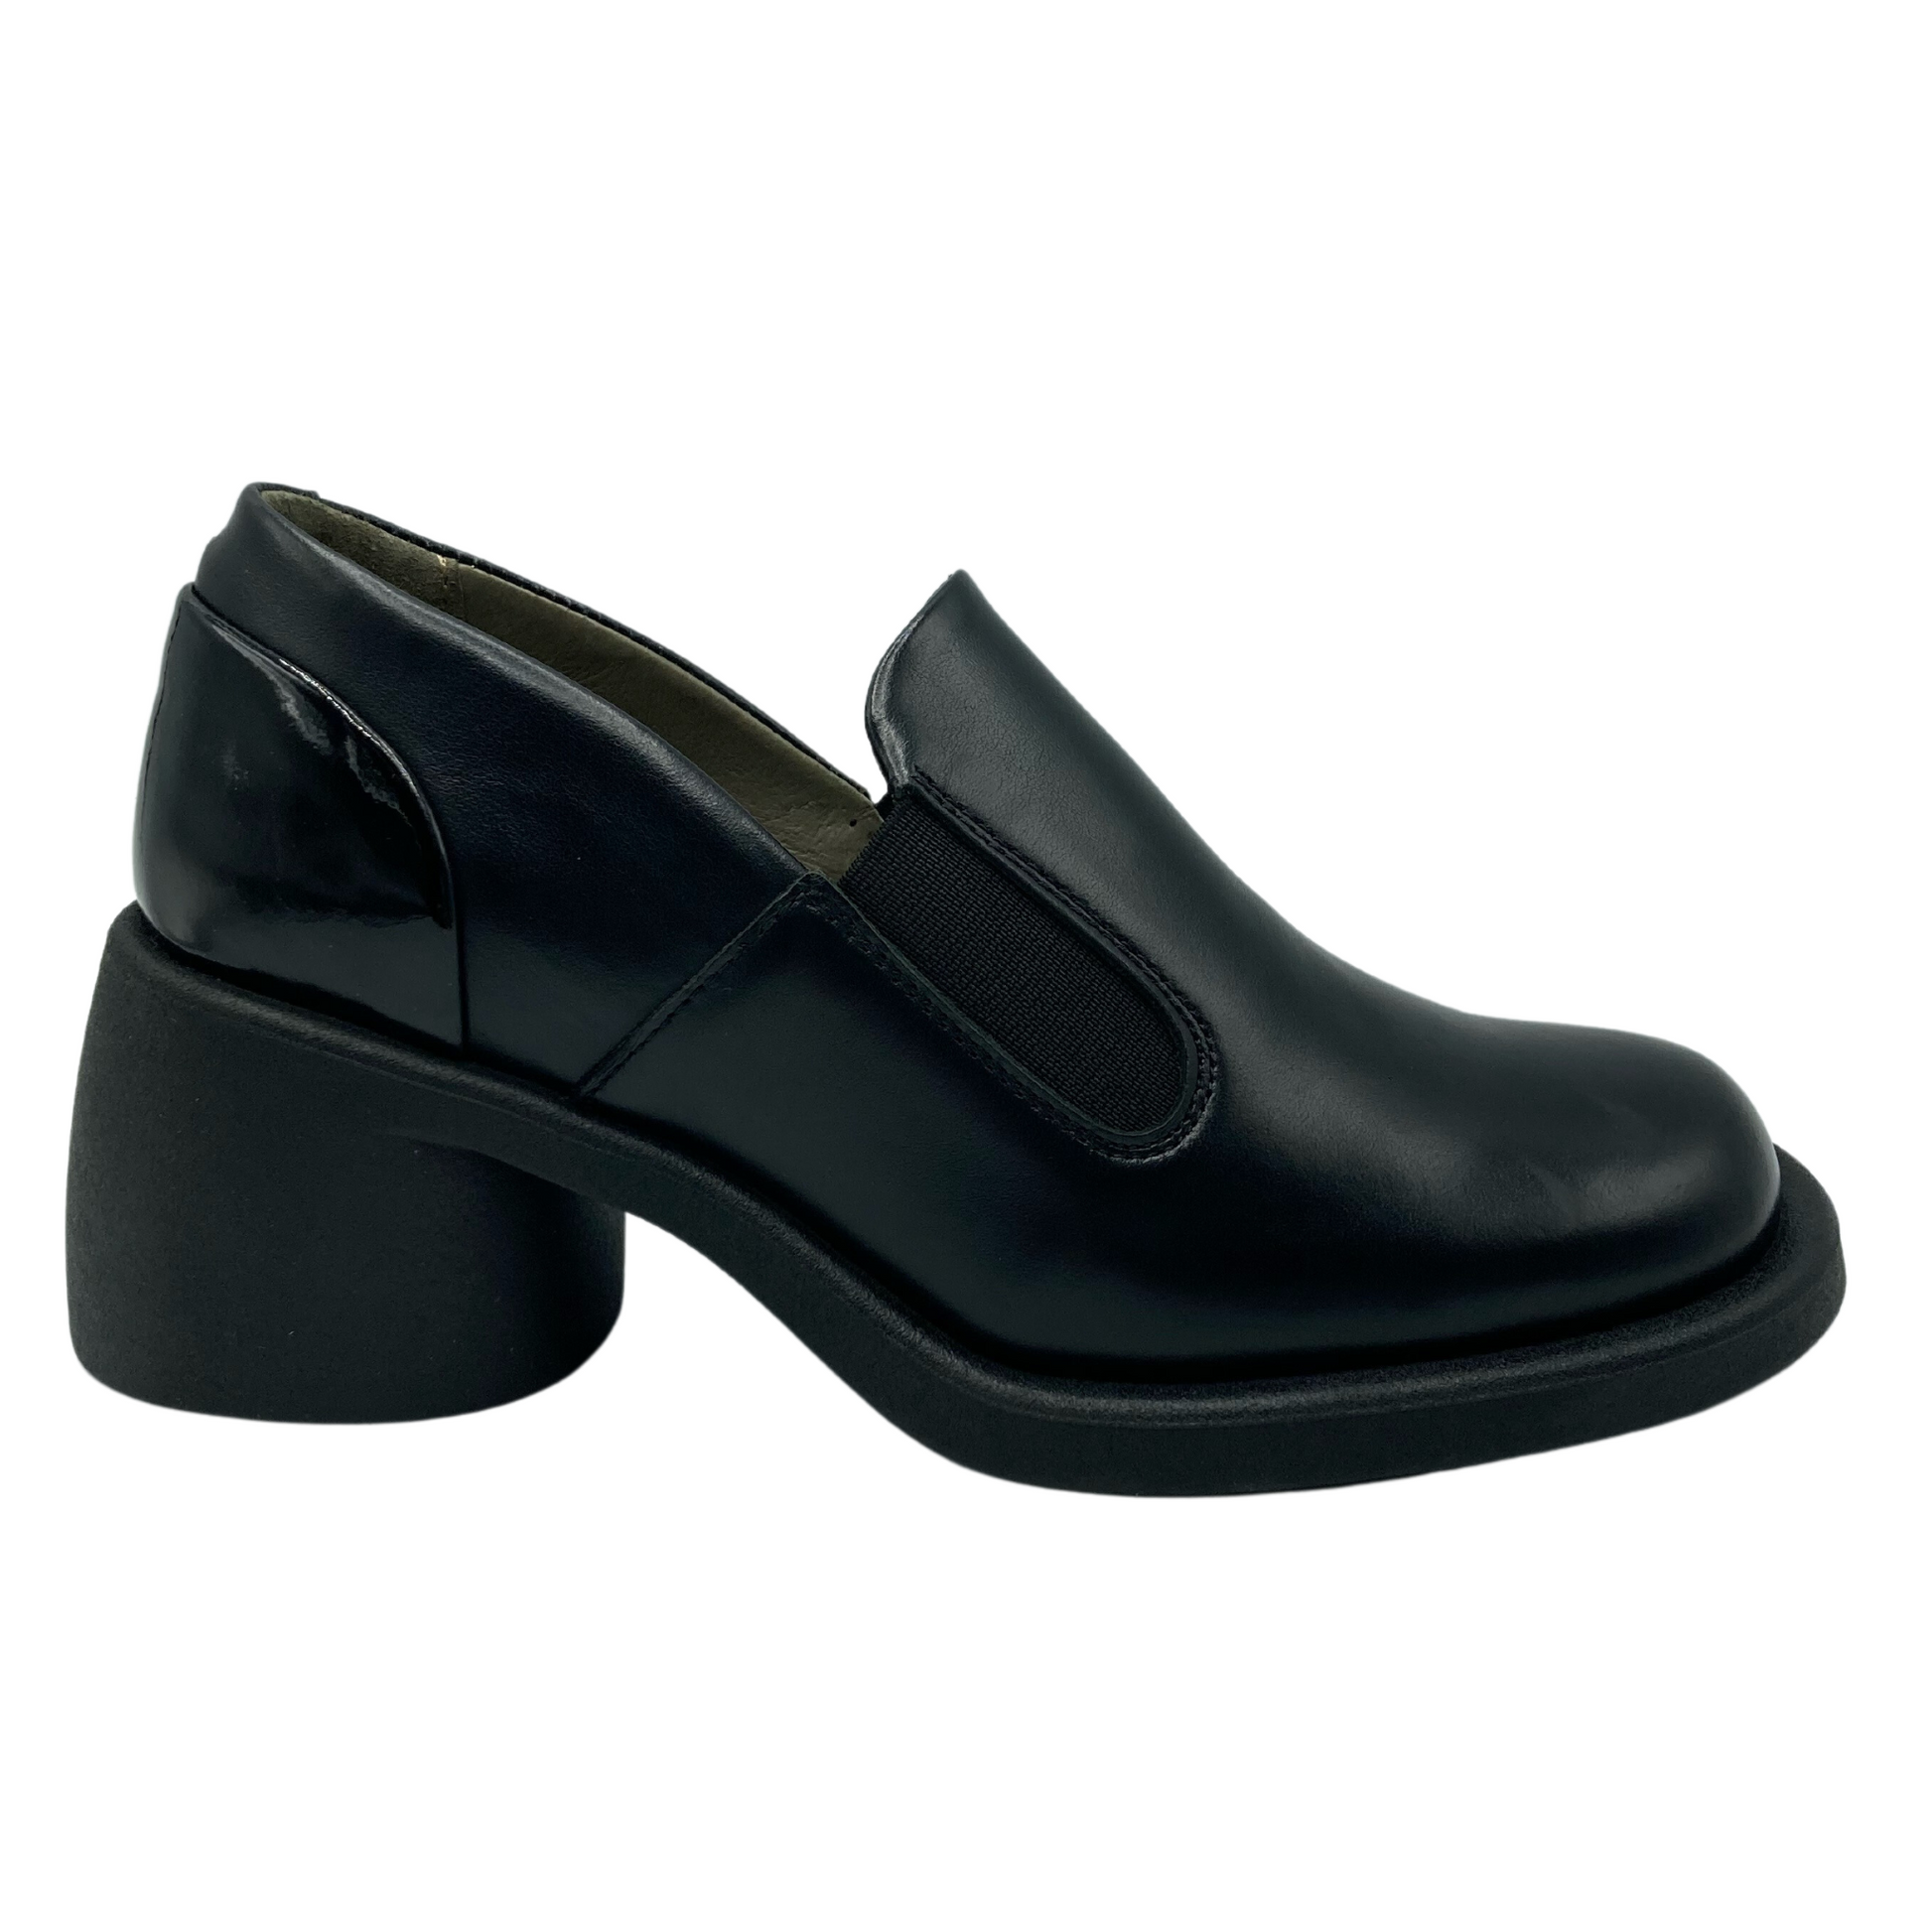 Right facing view of black leather loafer with elastic gore and black sole